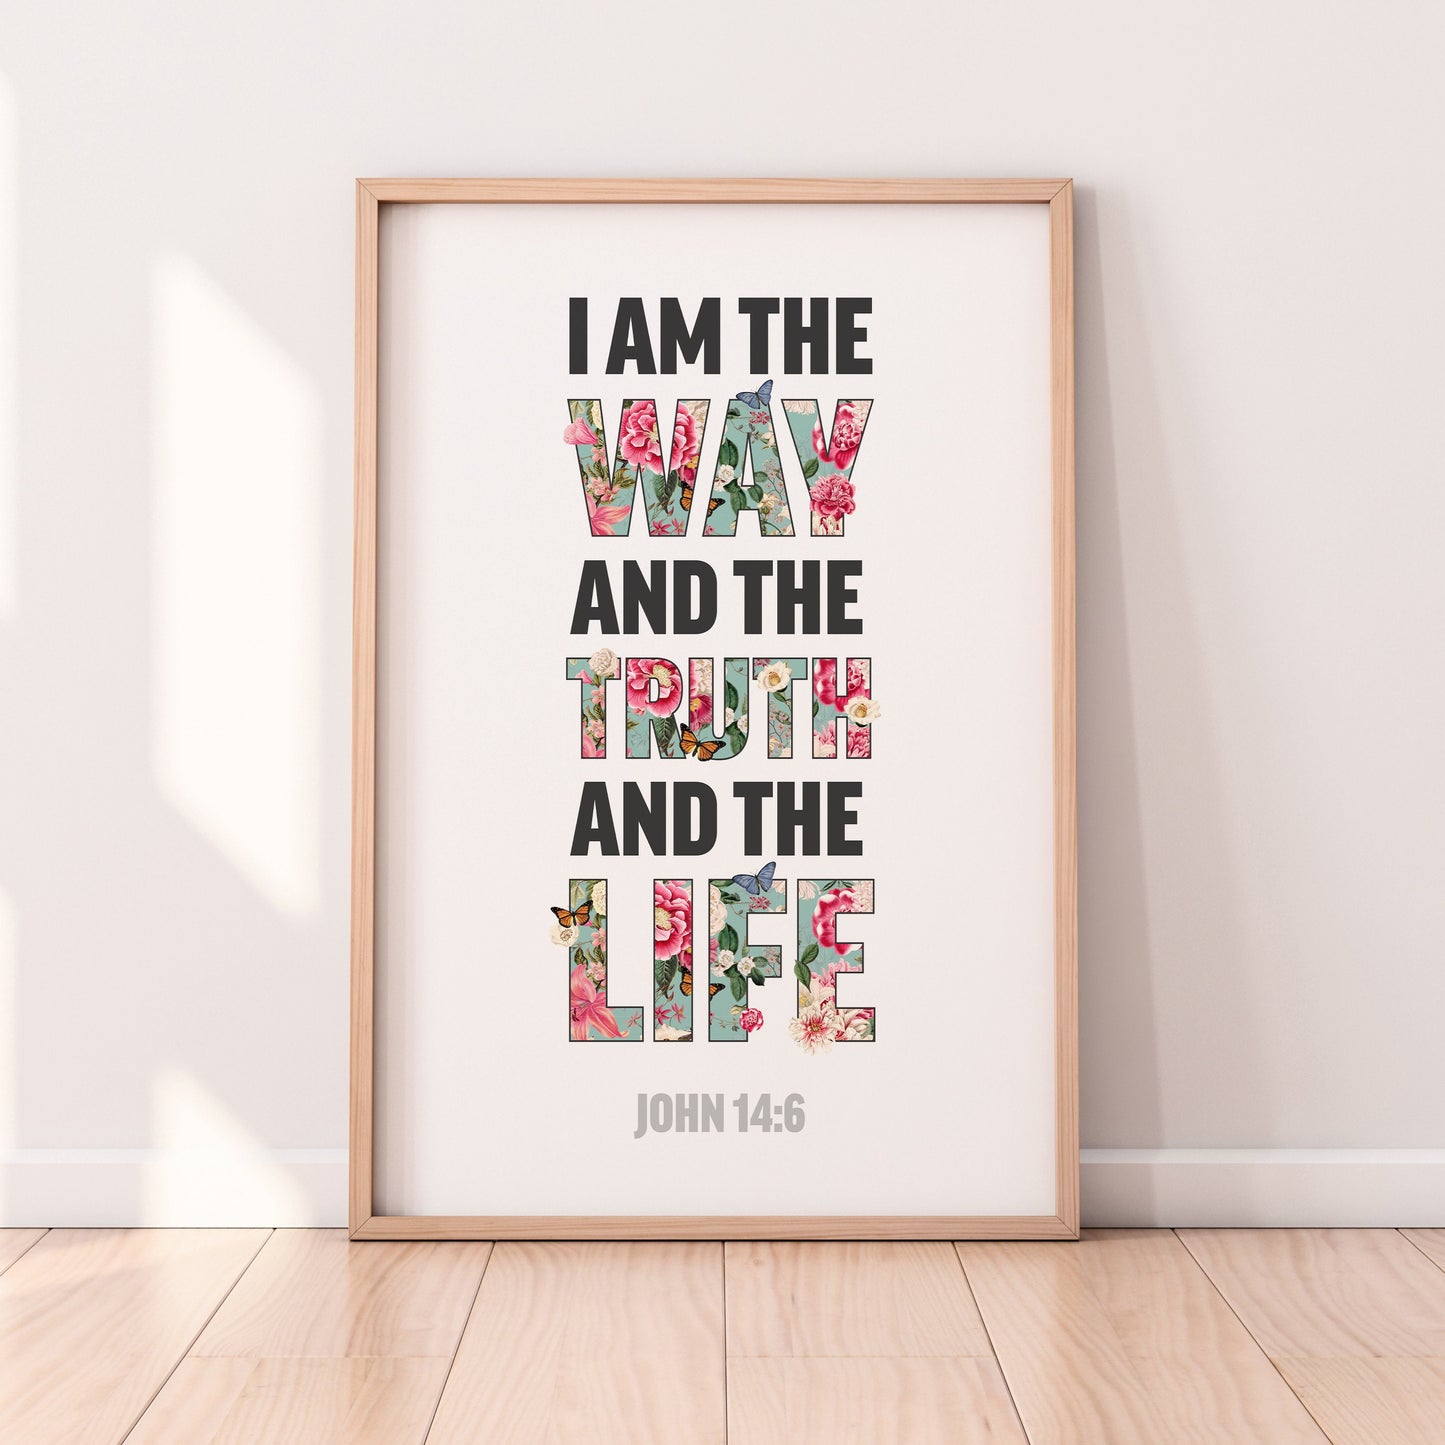 I am the way, and the truth and the life, John 14 verse 6, Christian poster, Bible Wall art